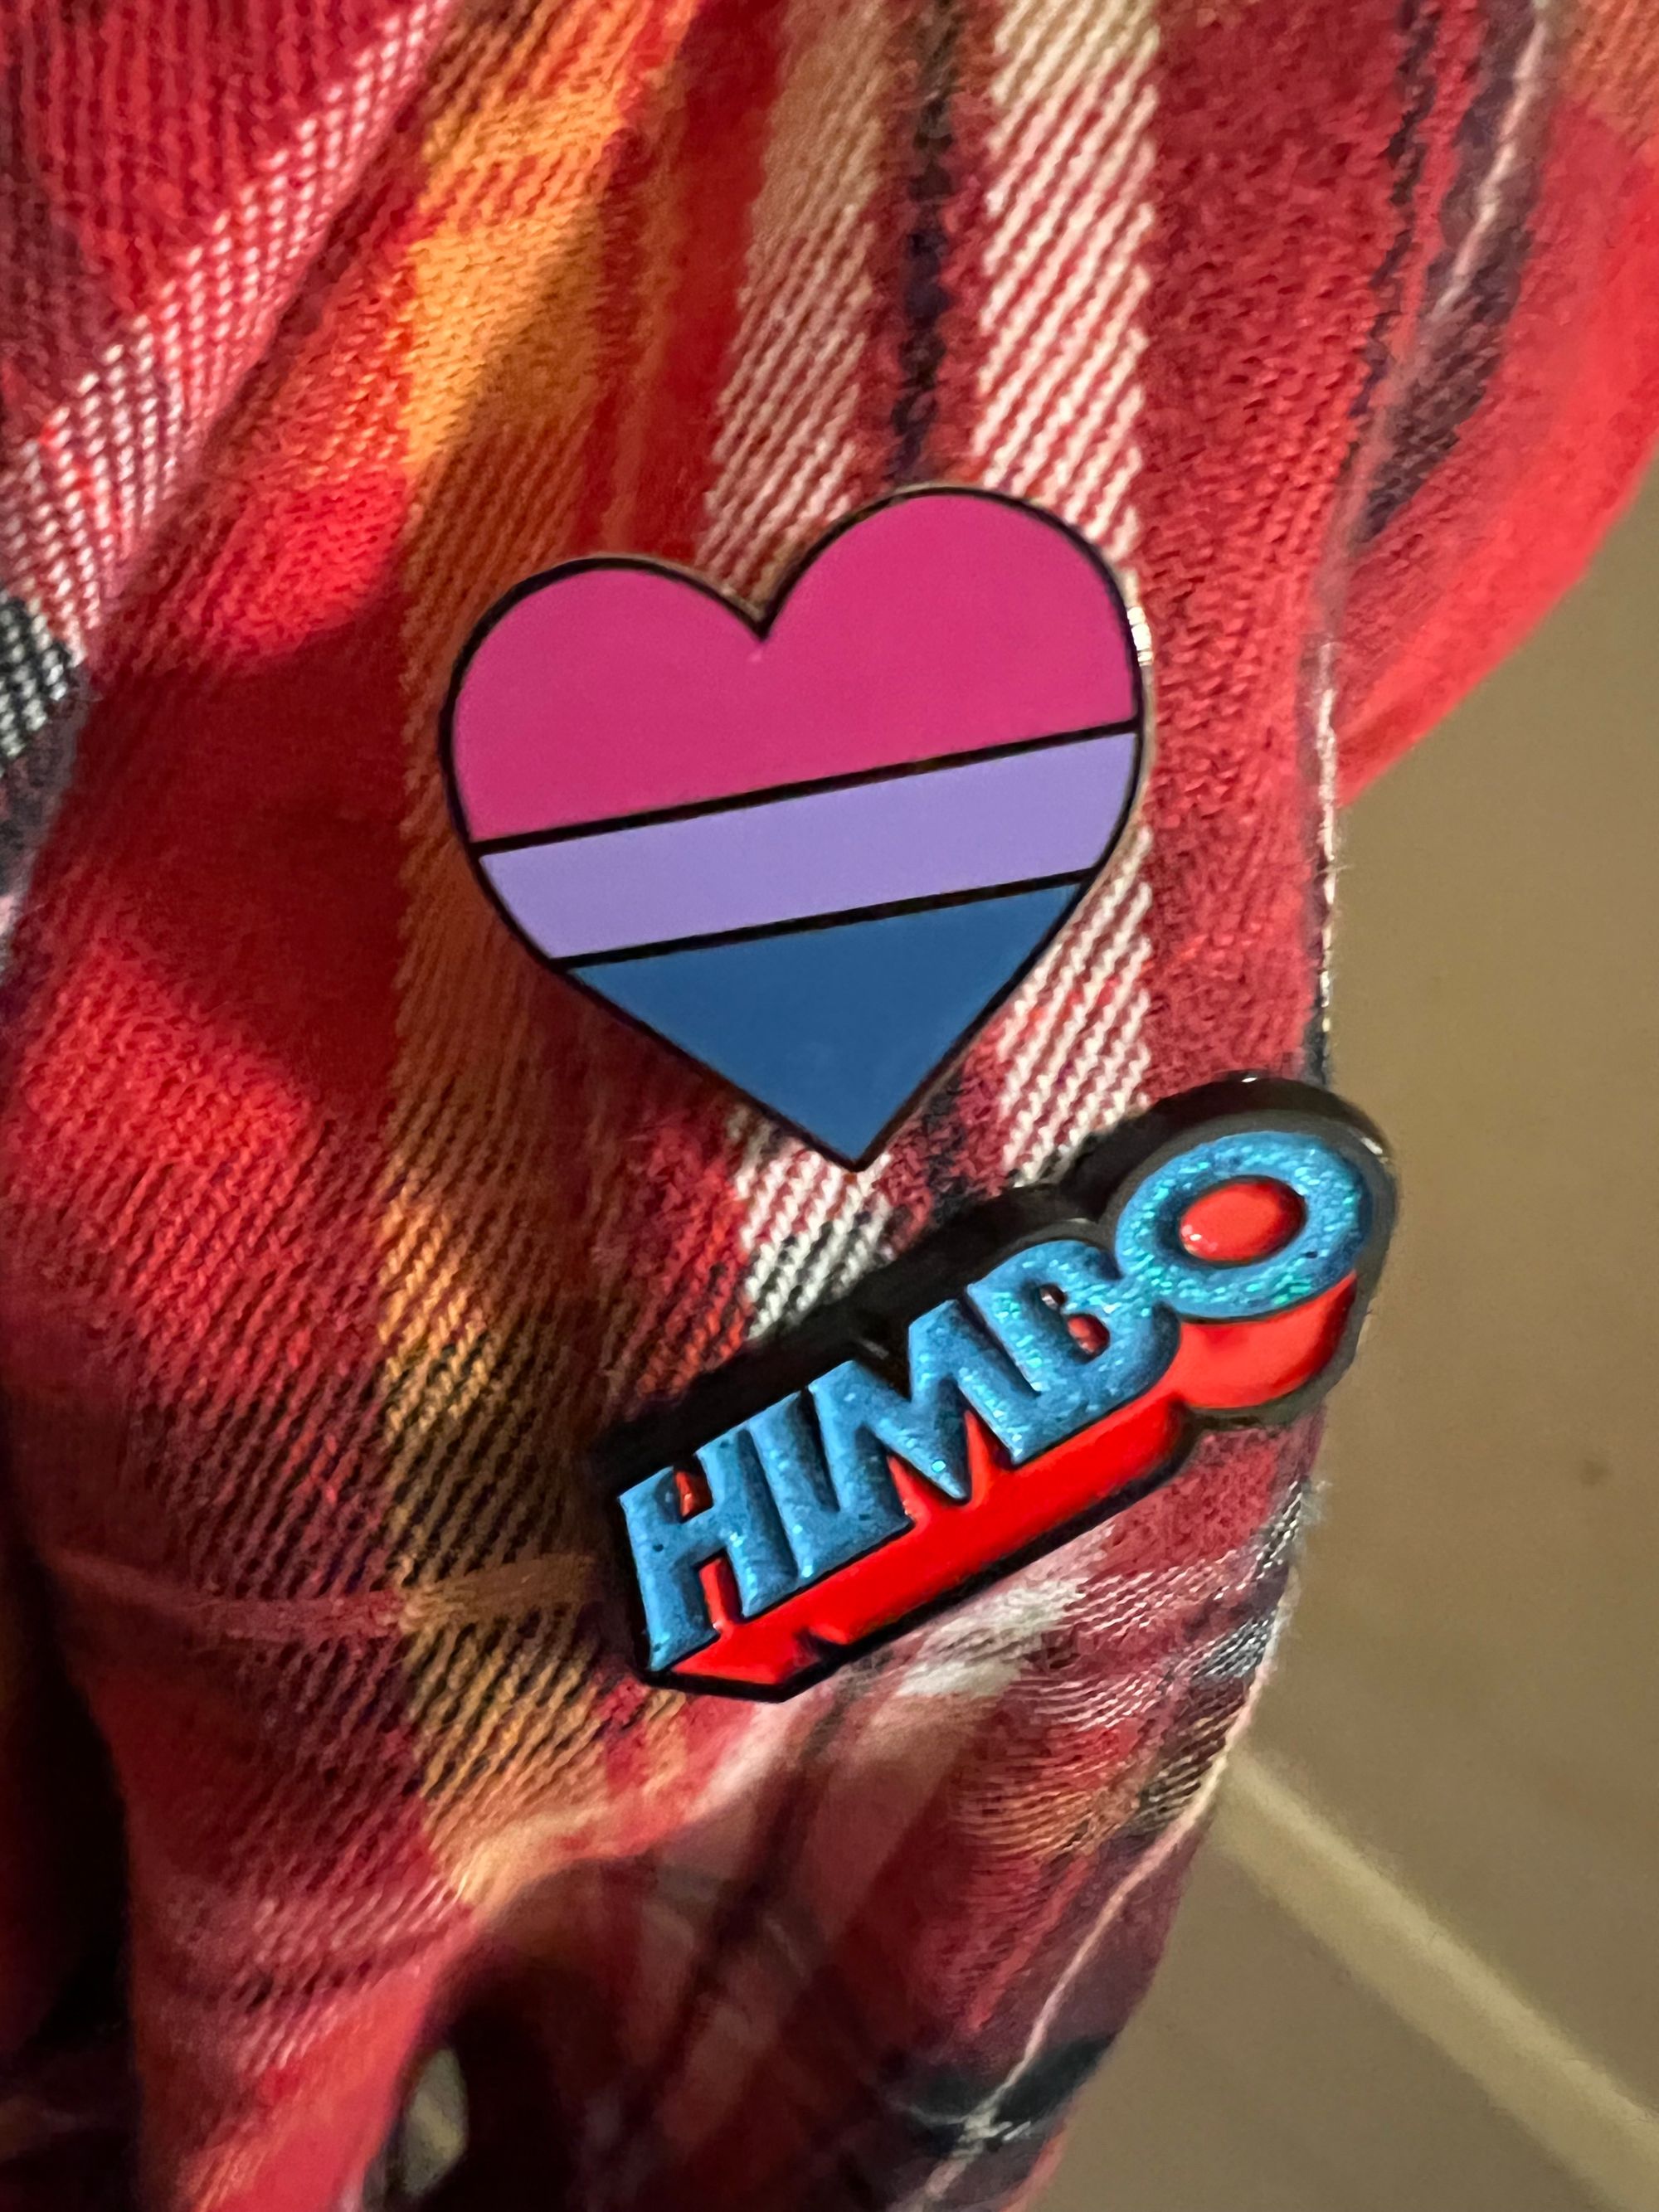 My plaid shirt with a Bisexual Heart badge and one of Joe Glass's "Himbo" badges.